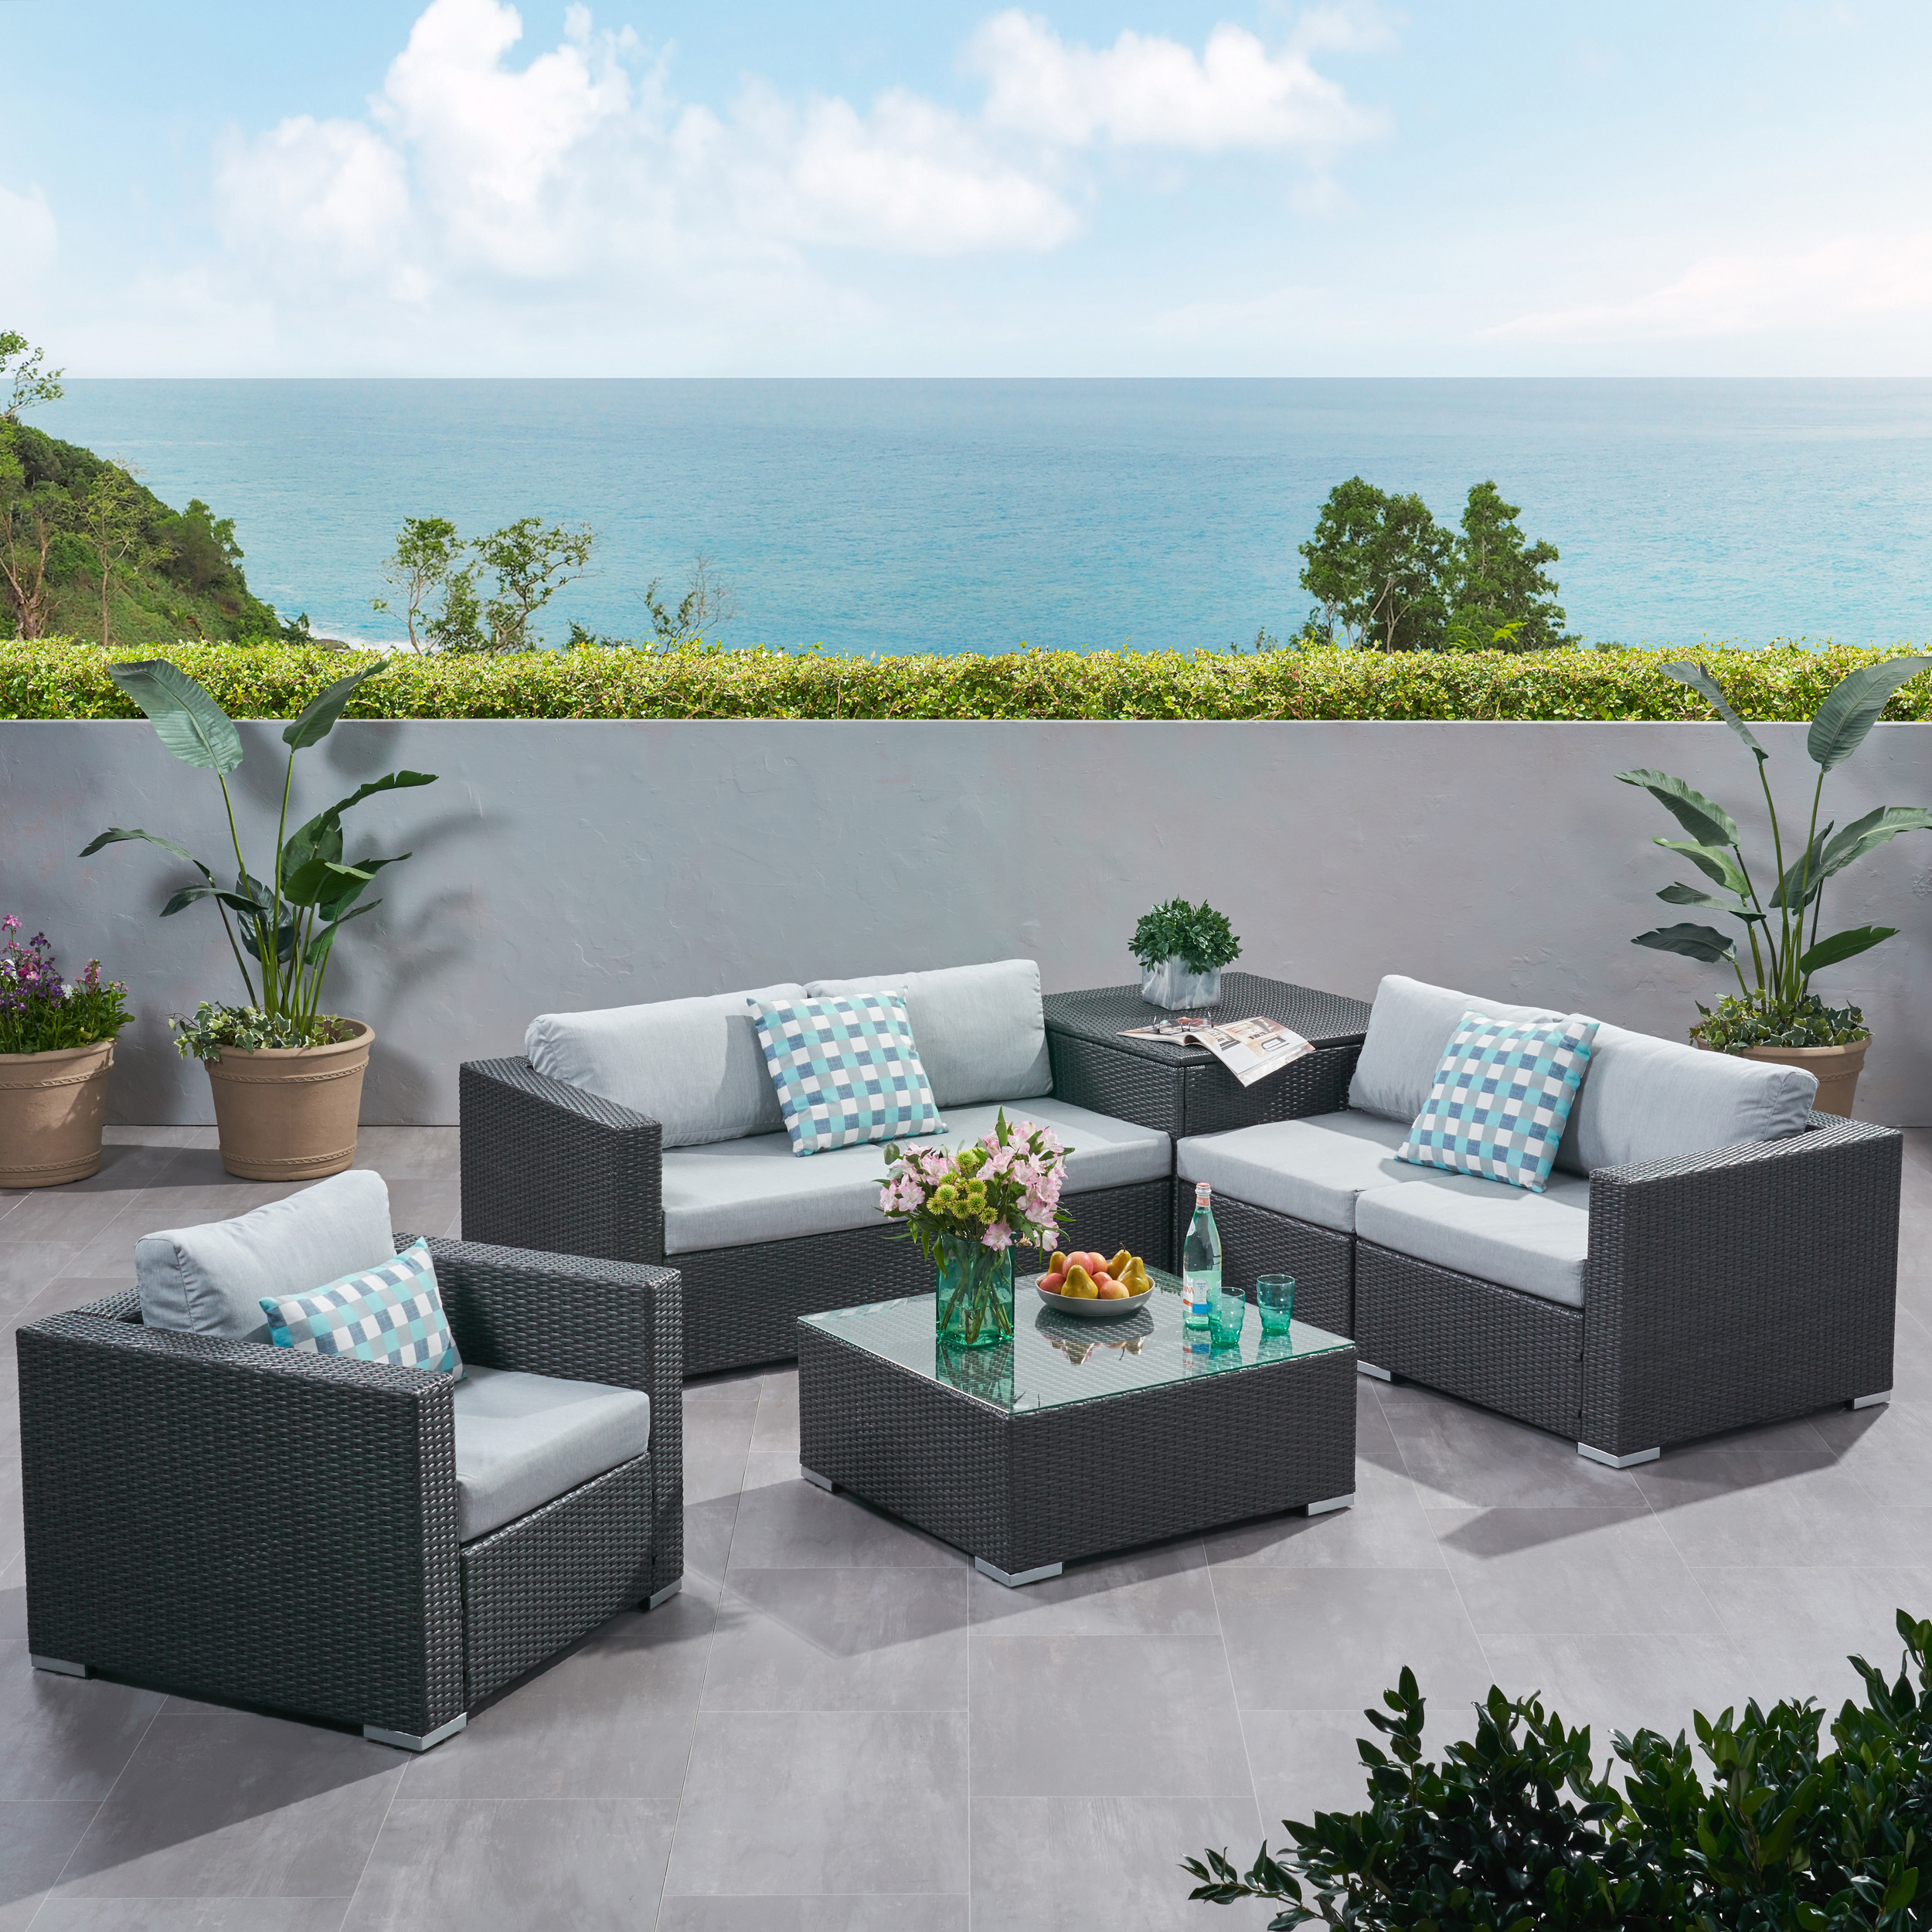 Faviola Outdoor 5 Seater Wicker Sectional Sofa Set with Storage Ottoman and Sunbrella Cushions, Gray and Sunbrella Canvas Granite - image 2 of 11